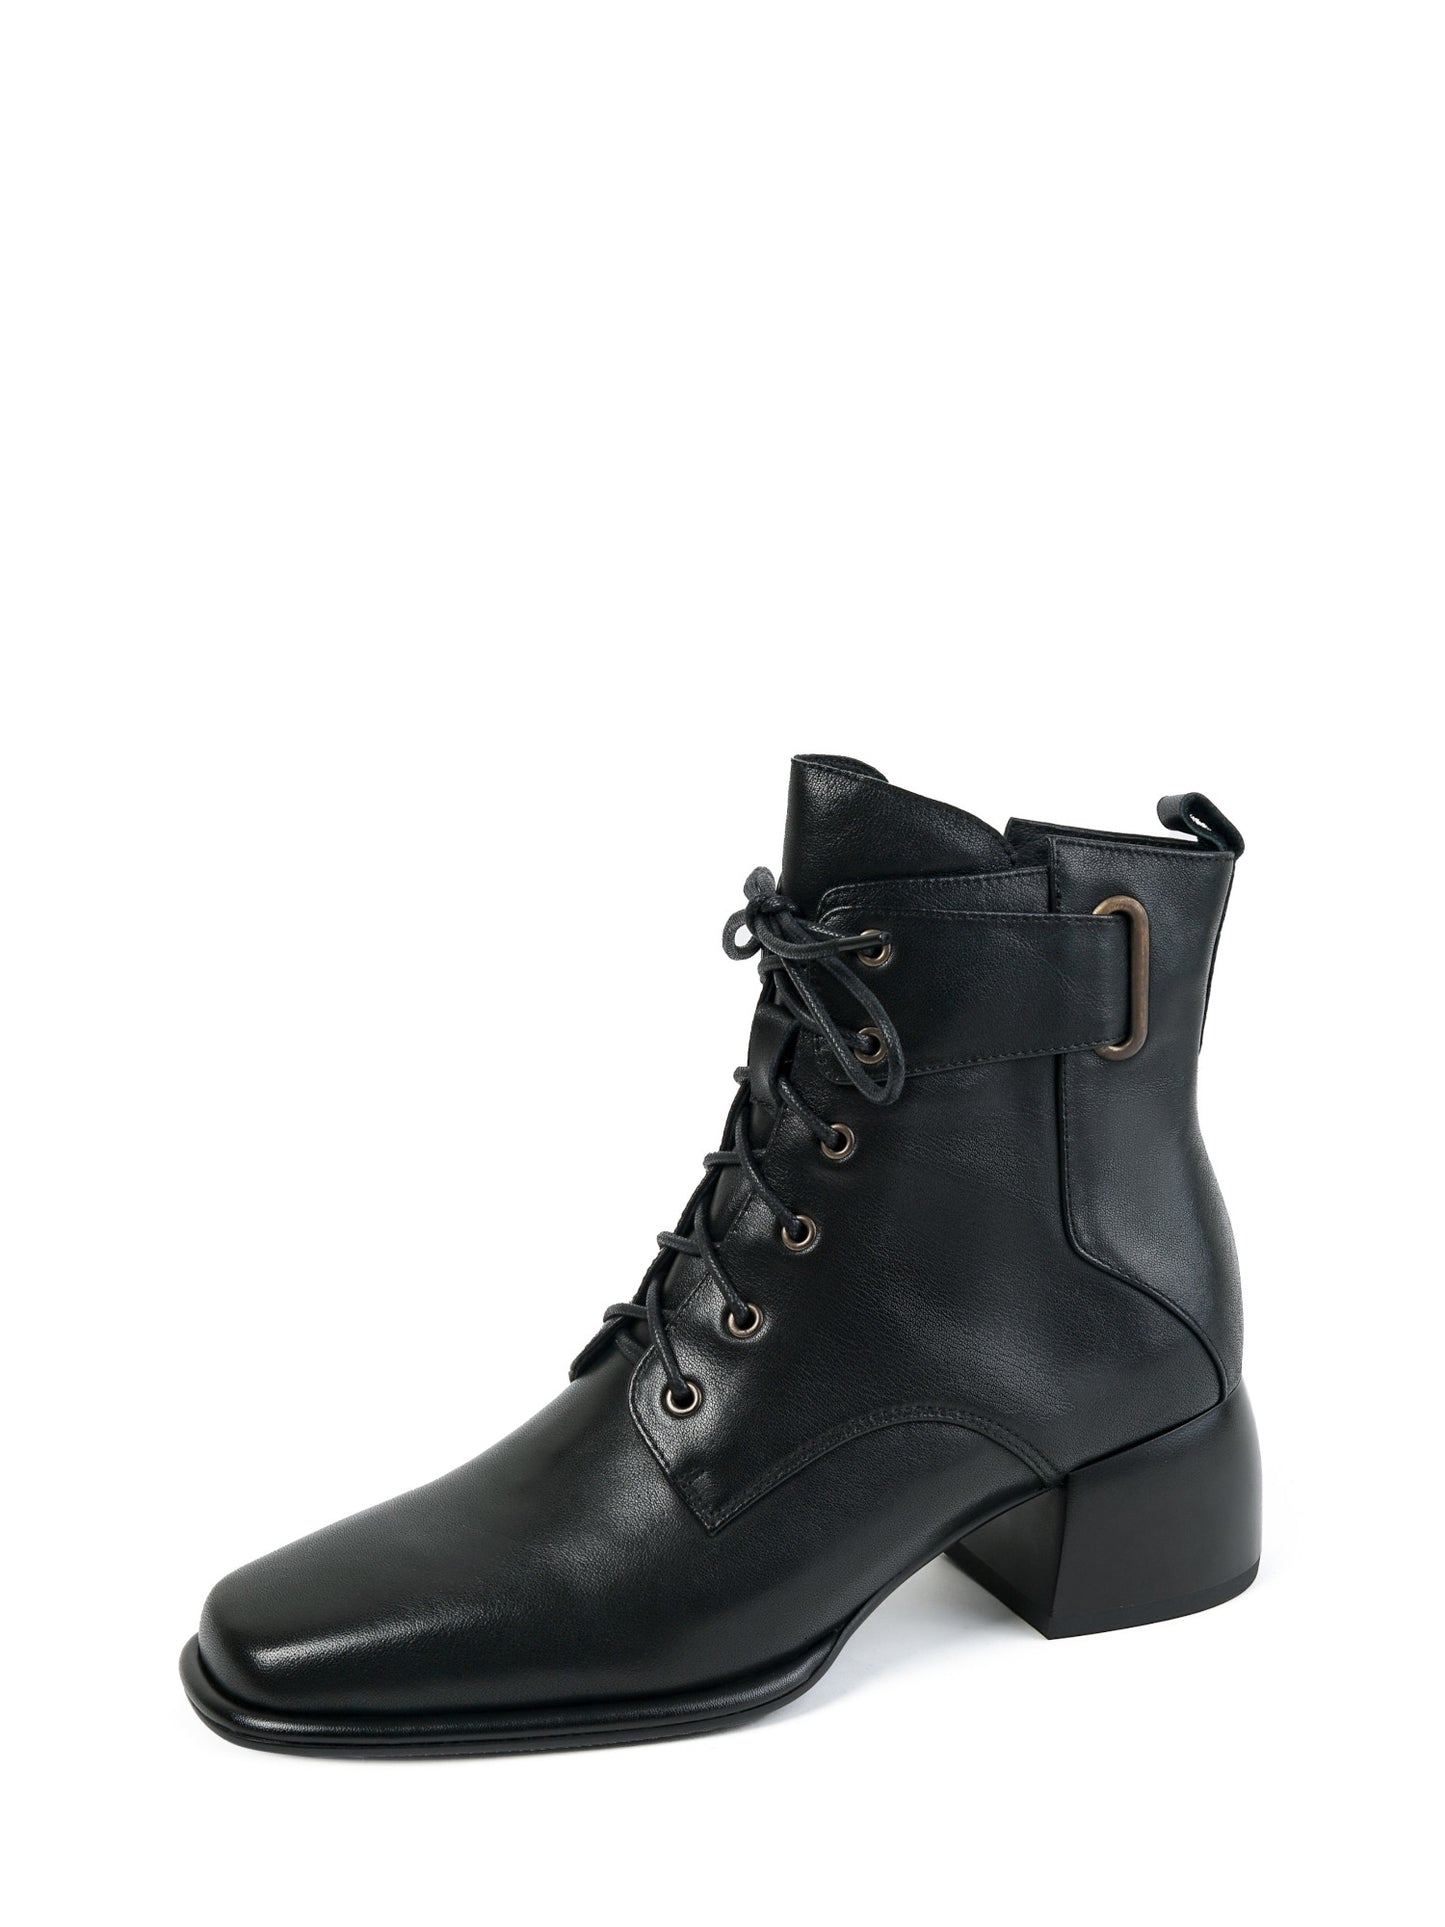 Almer-Black-Leather-Boots